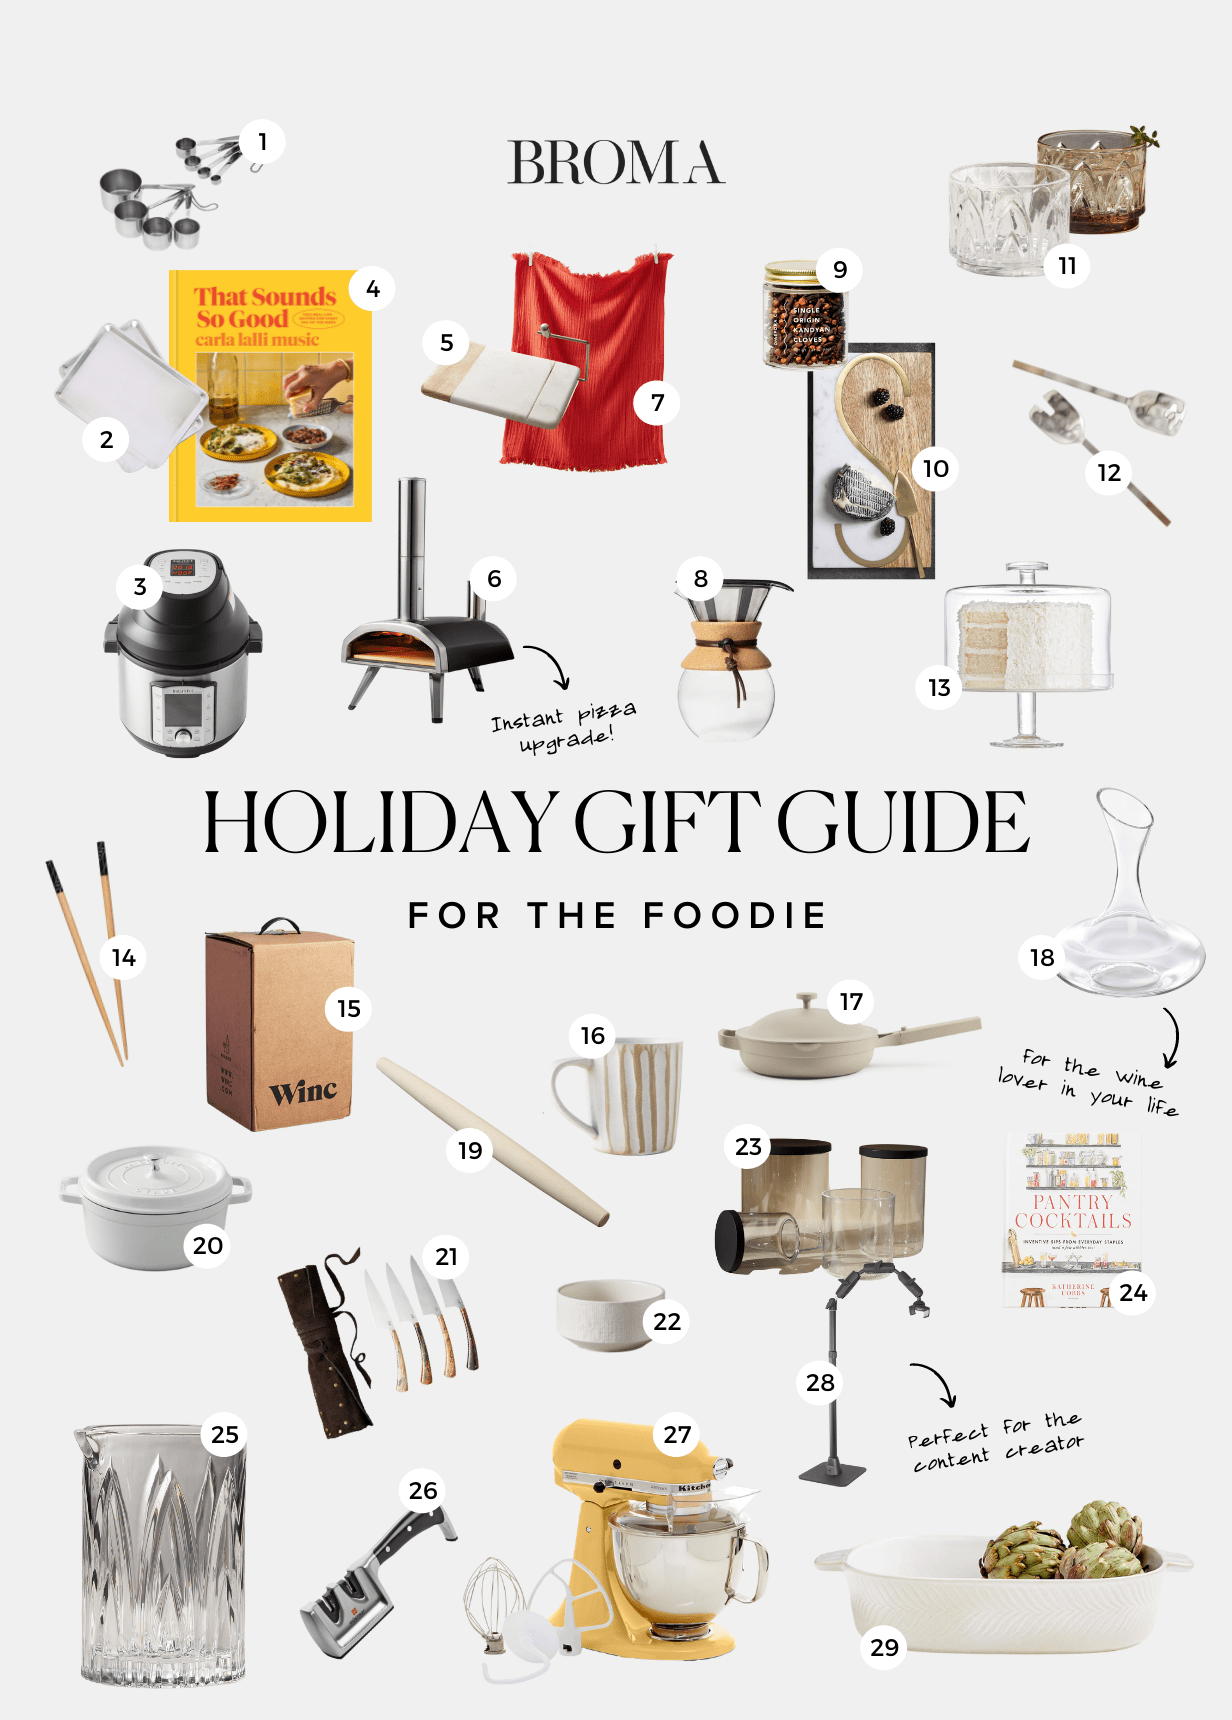 Holiday Gift Guide: Gifts for Bakers, Cooks & Foodies - Brown Eyed